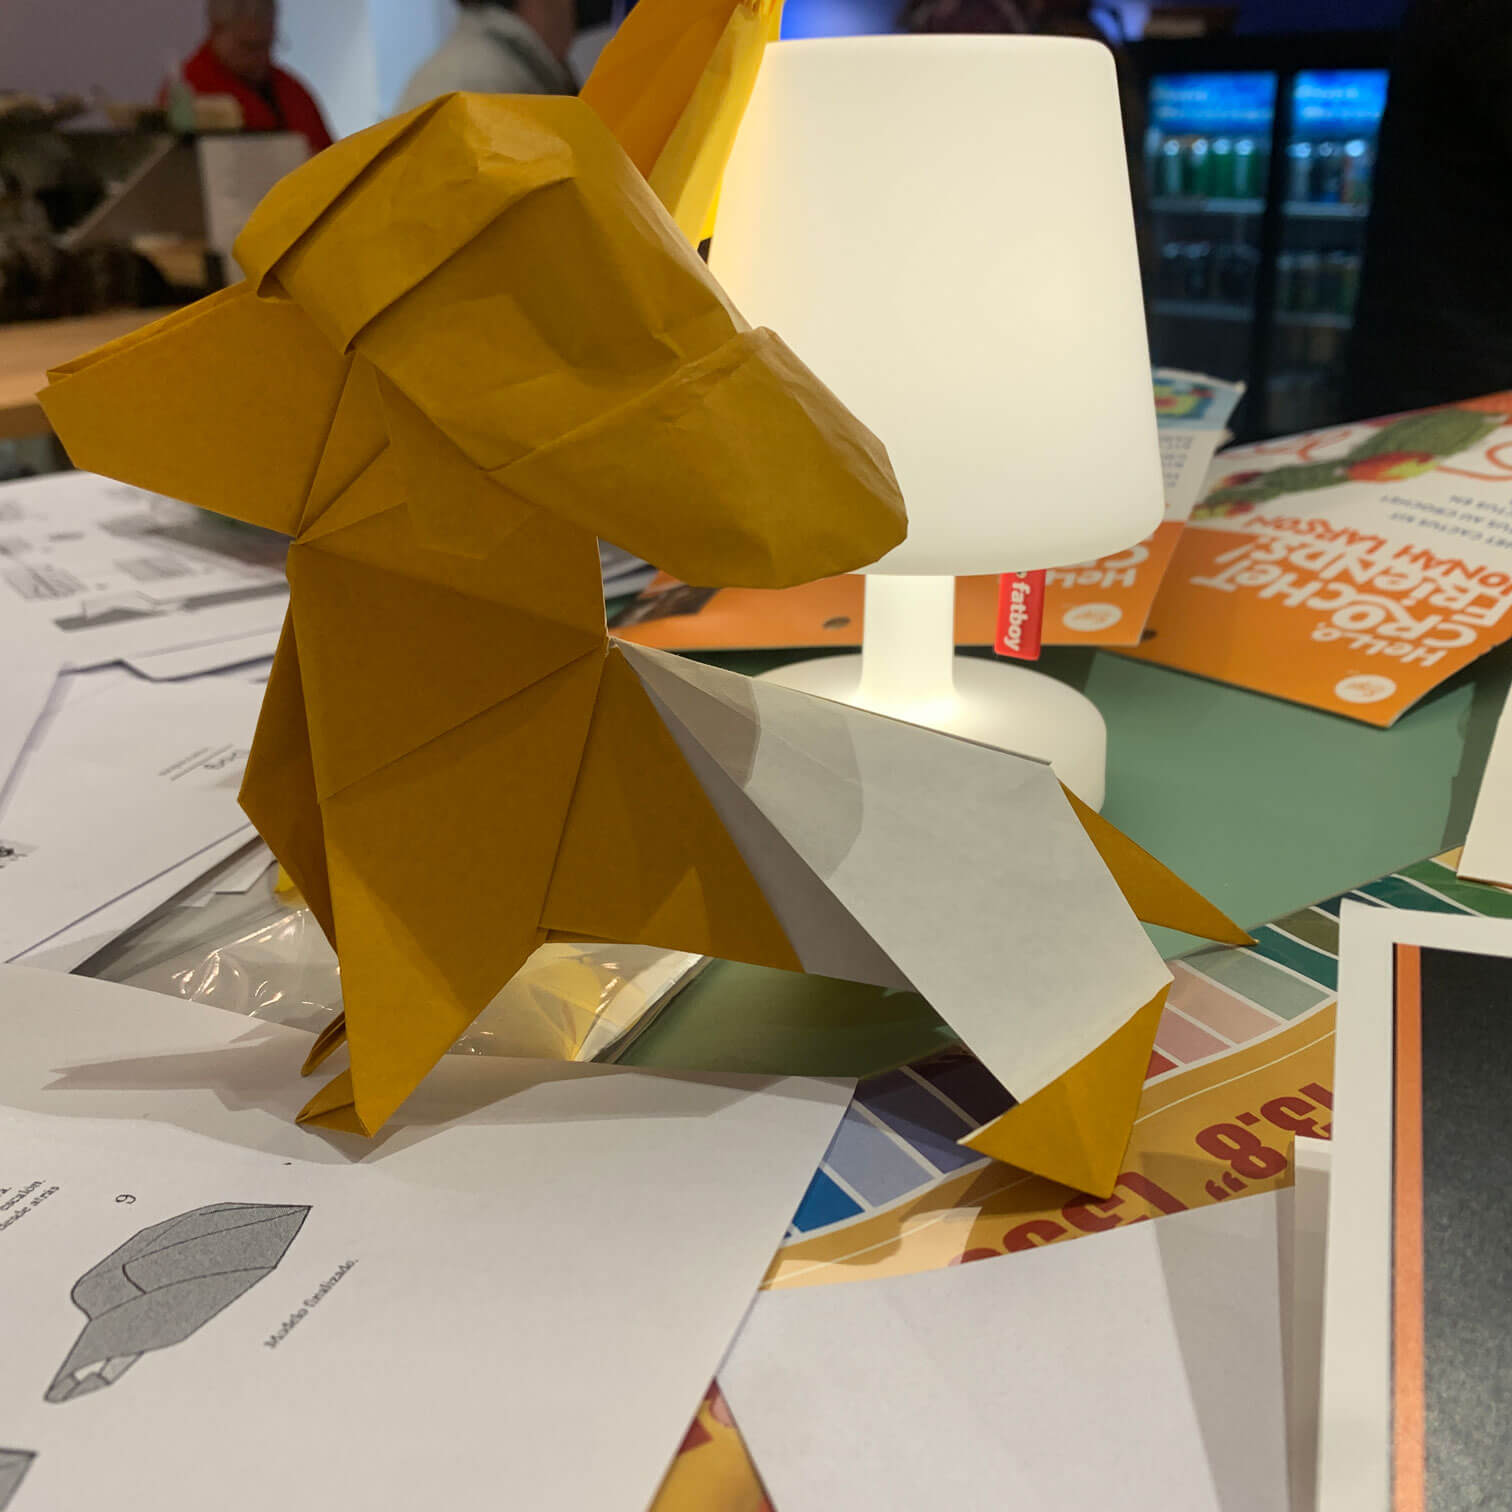 A tan origami dog made by Mo Chen